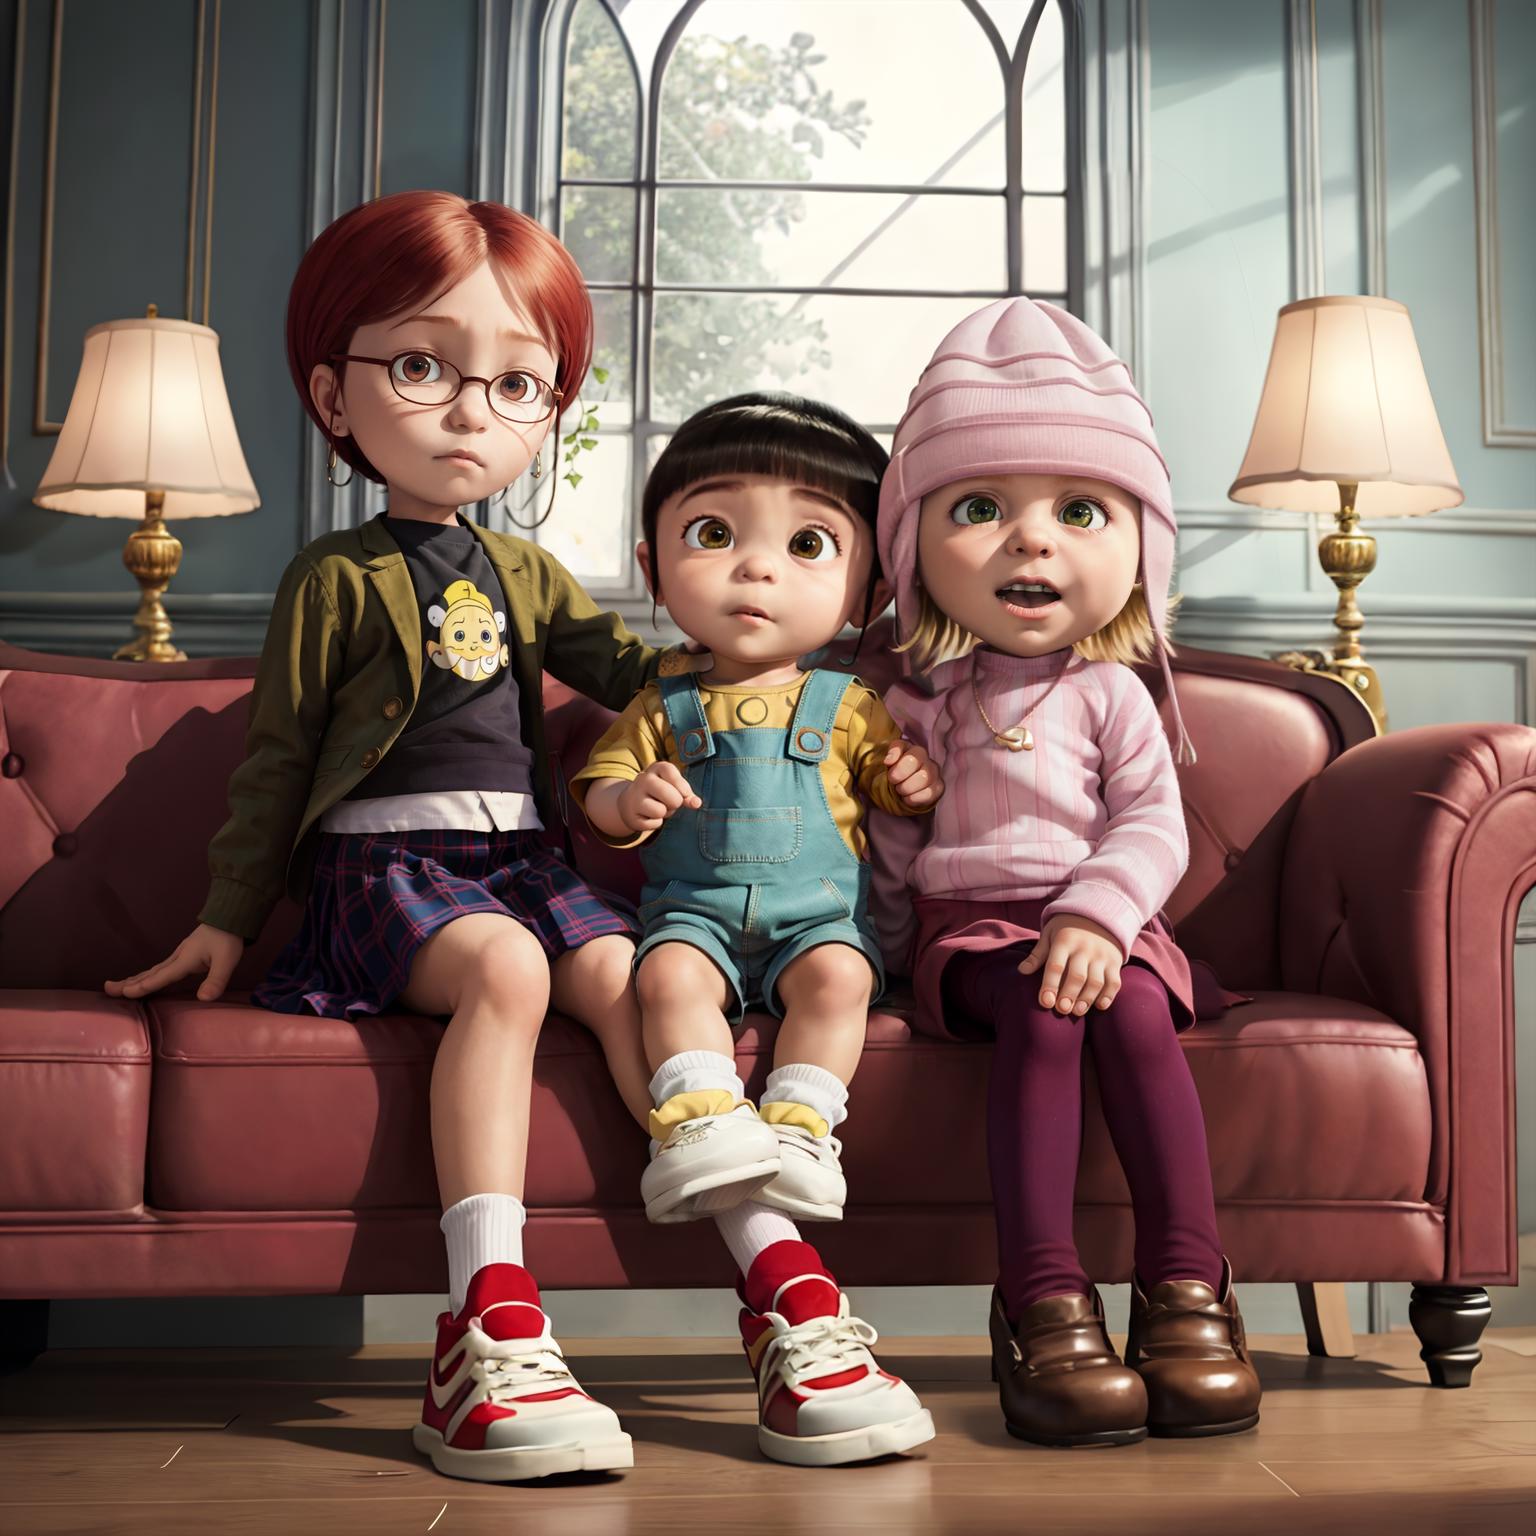 Three cartoon children sitting on a couch with red and white shoes.